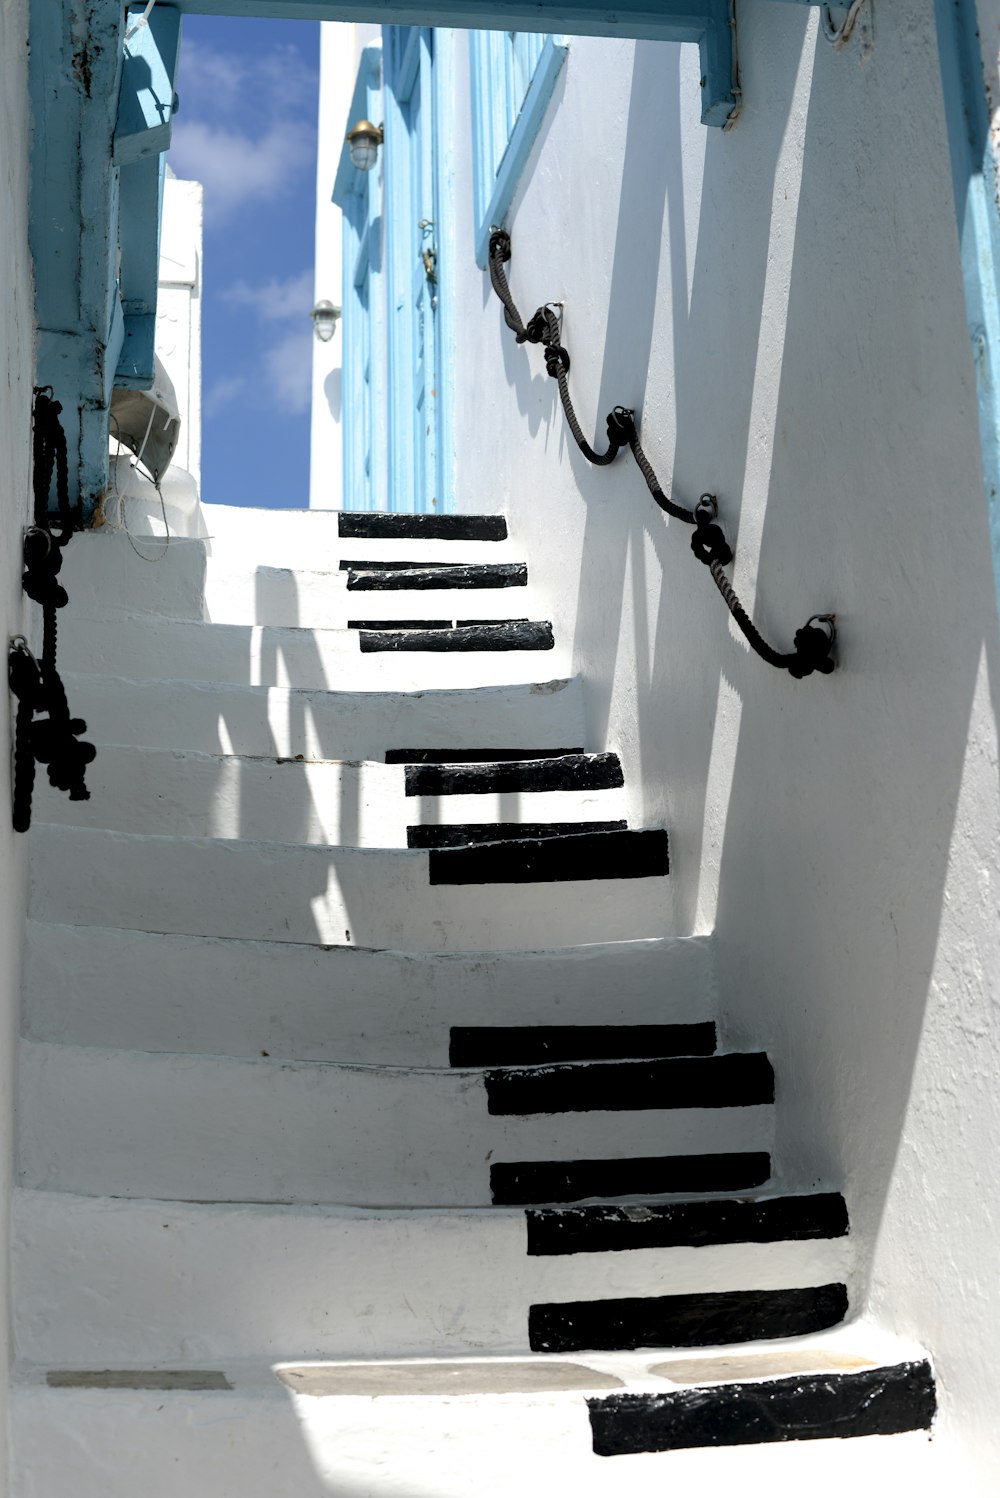 white and black piano keys-themed stairs during daytime